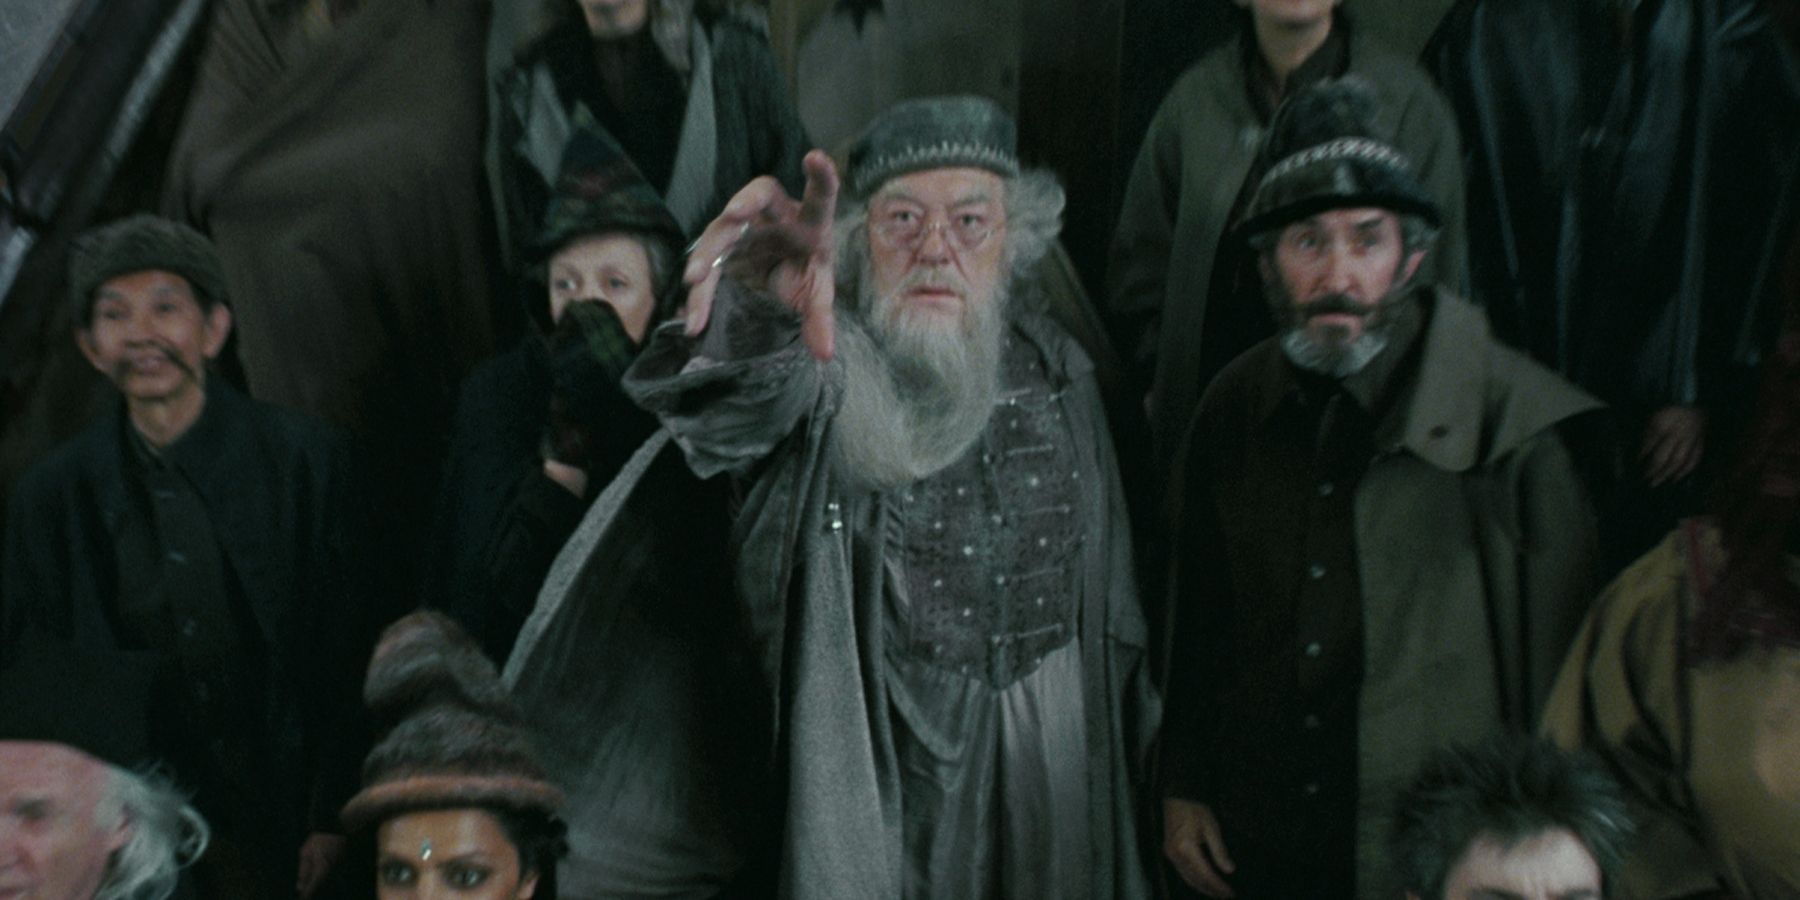 Harry Potter: The Mirror of Erised, Explained